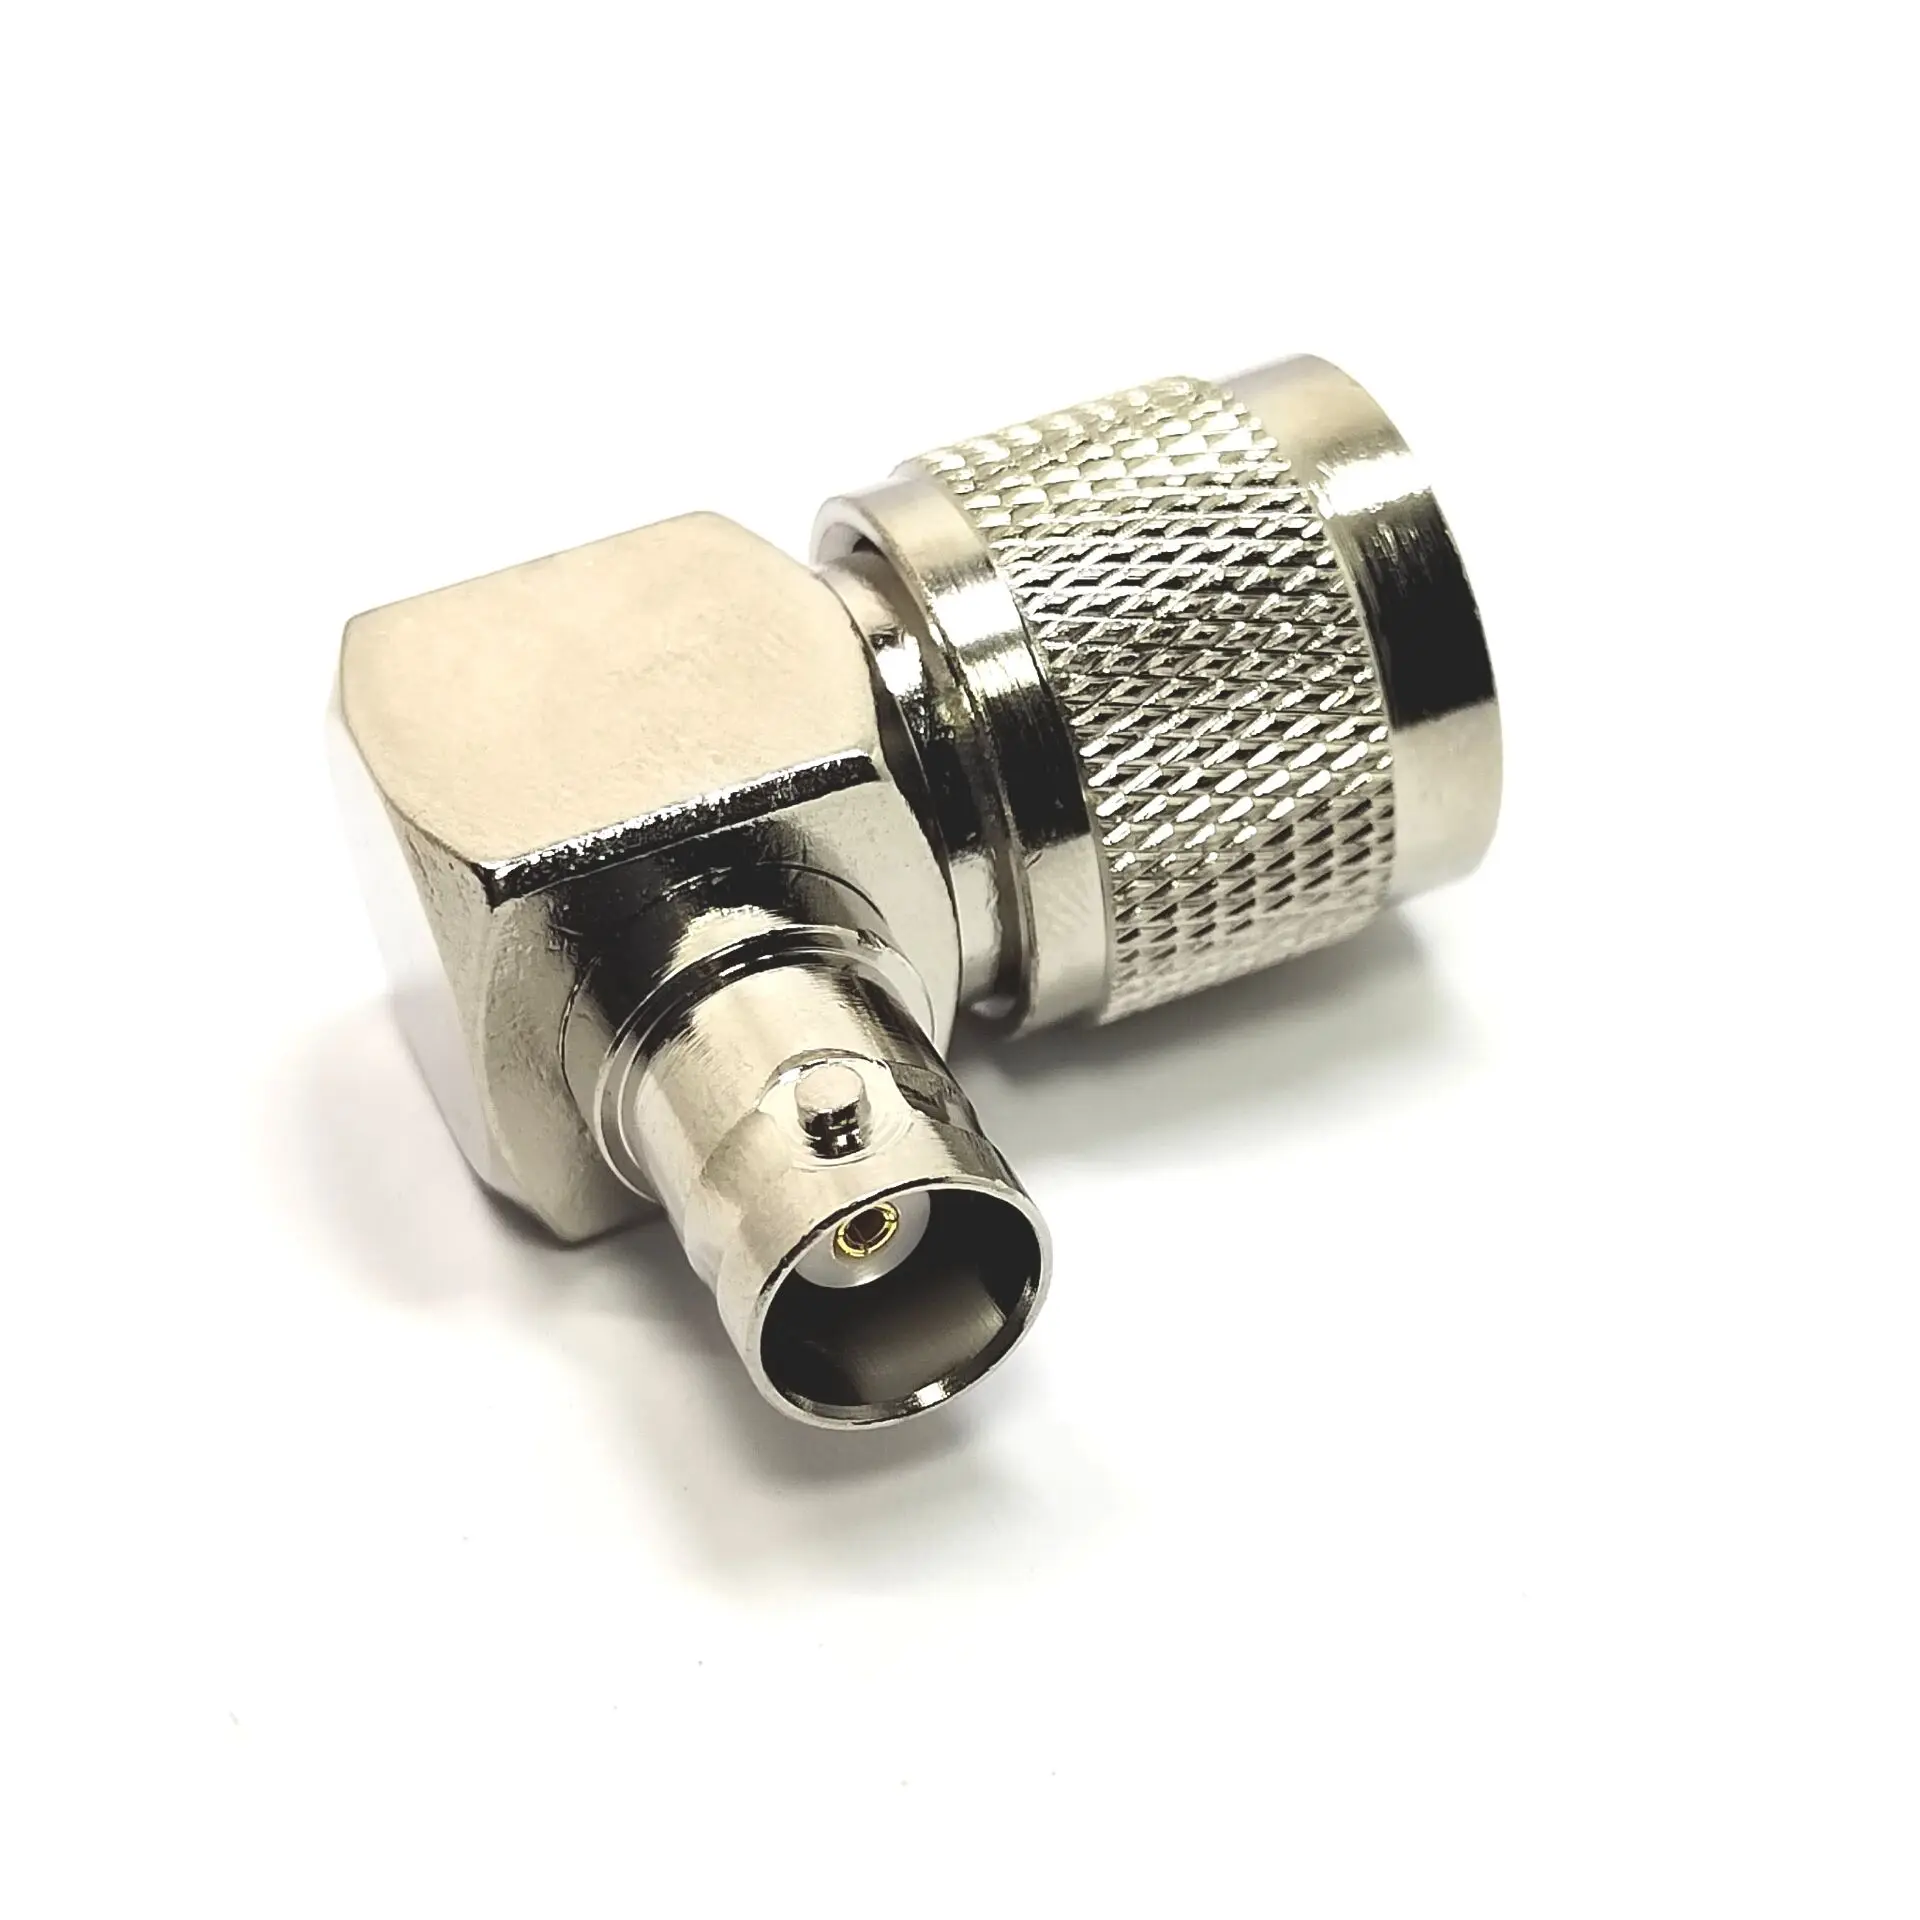 Nickel plated Rf Connector BNC Female To UHF PL259 Male Right Angle Adapter in stock details